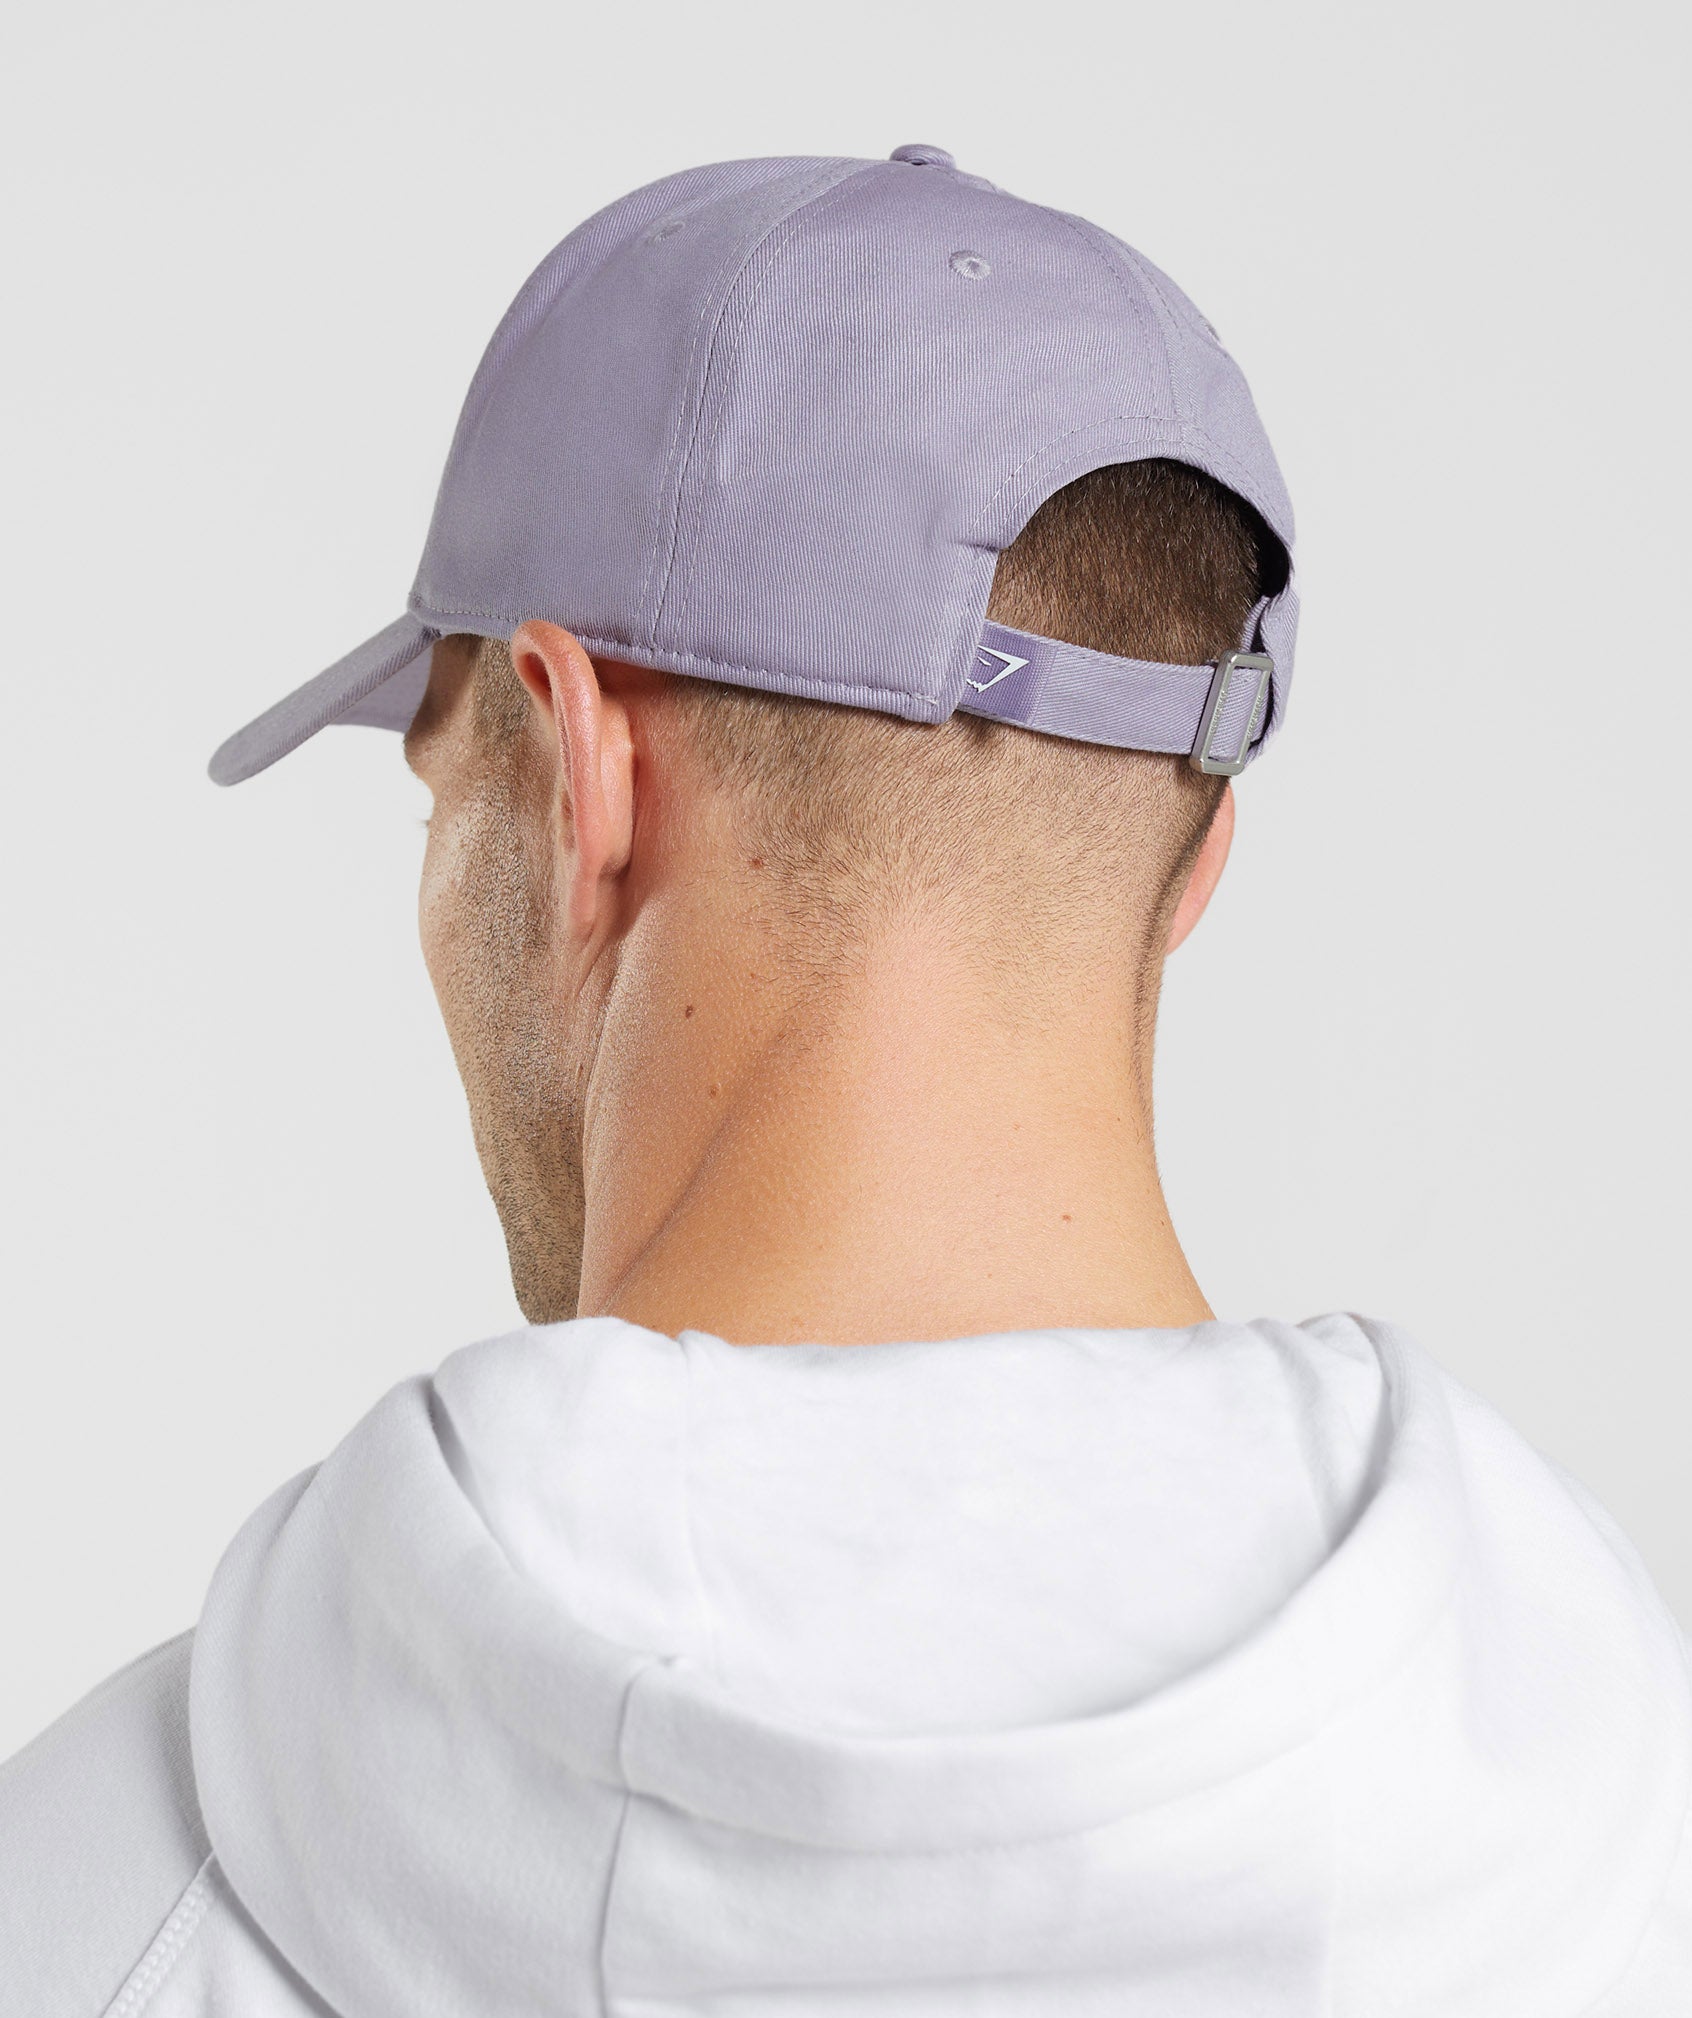 Sharkhead Cap in Shaded Lilac - view 5